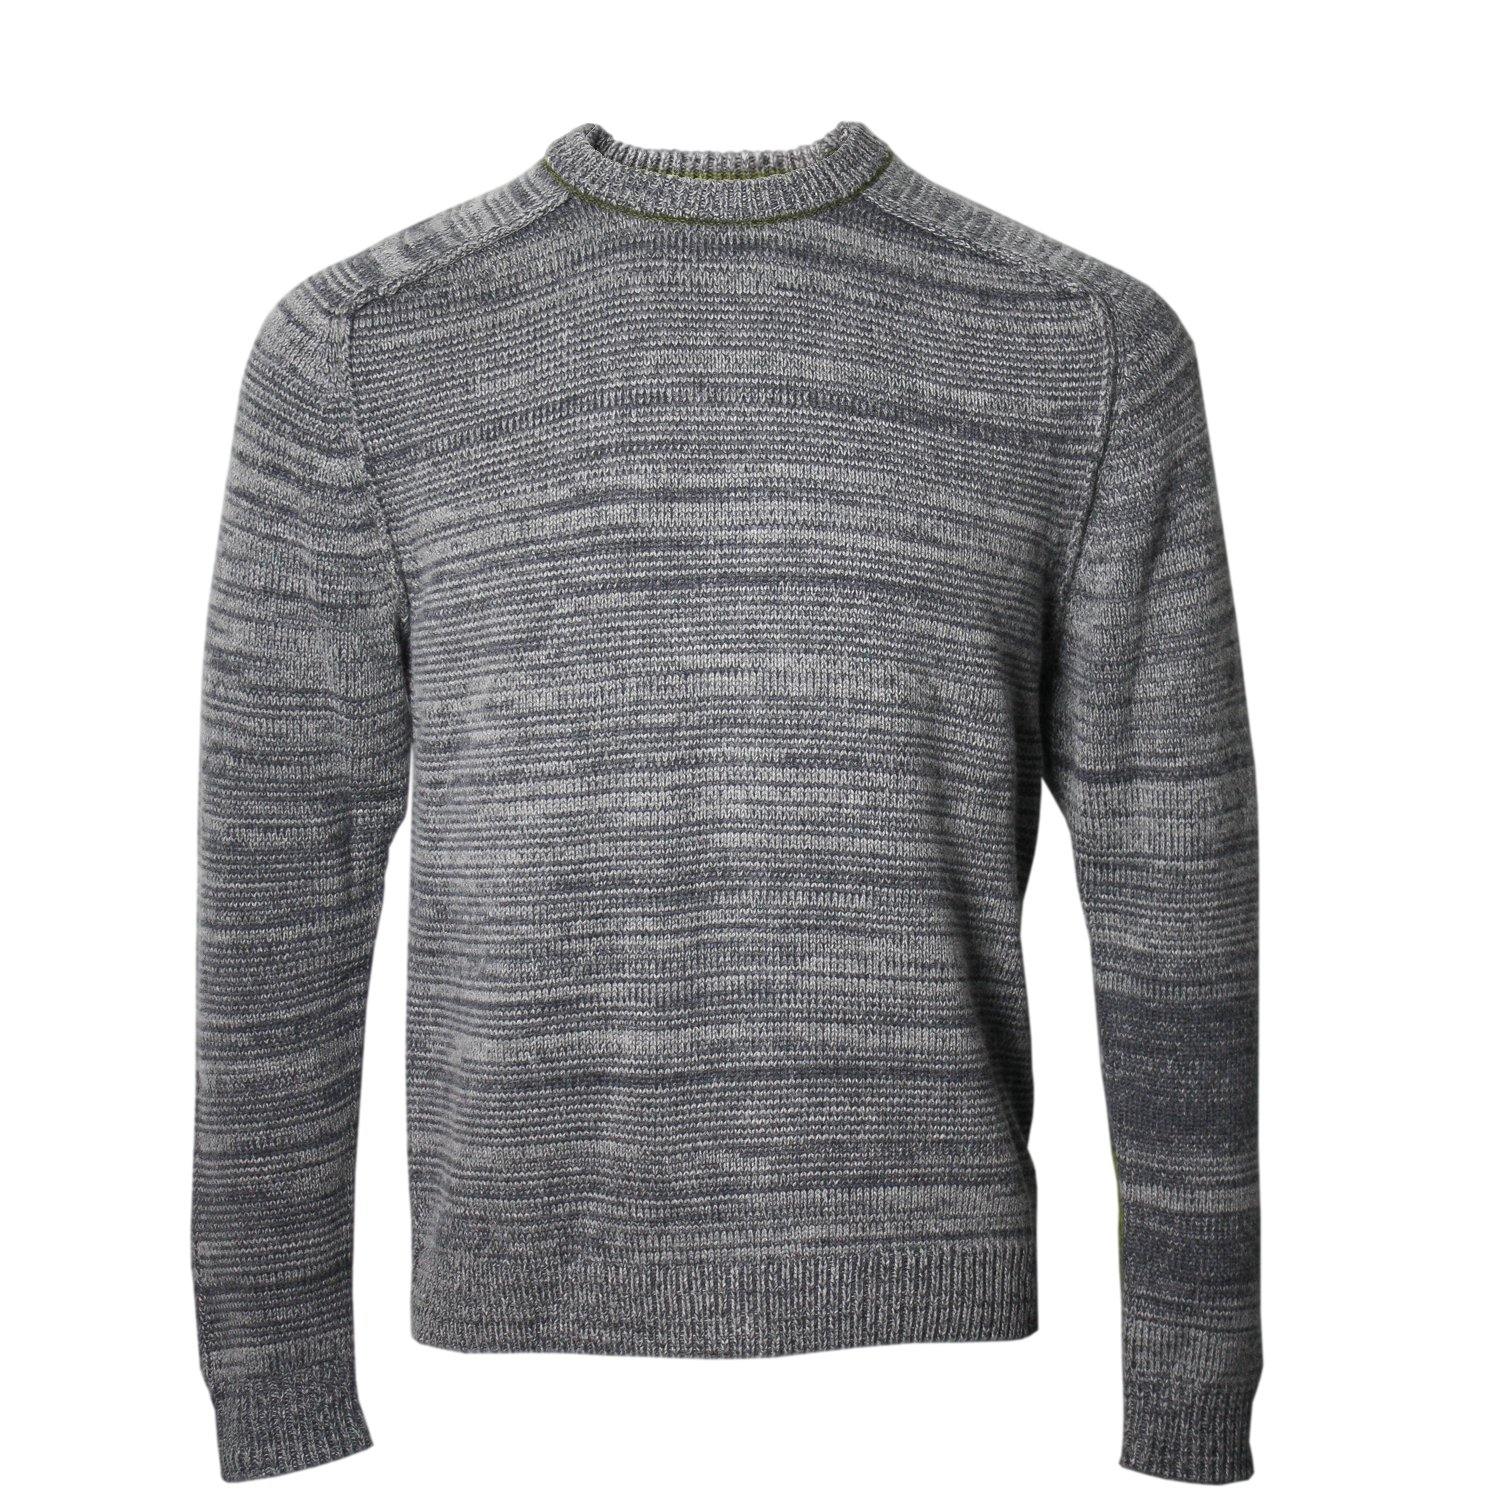 Crosby Crew Neck Sweater in Grey - Lords Of Harlech